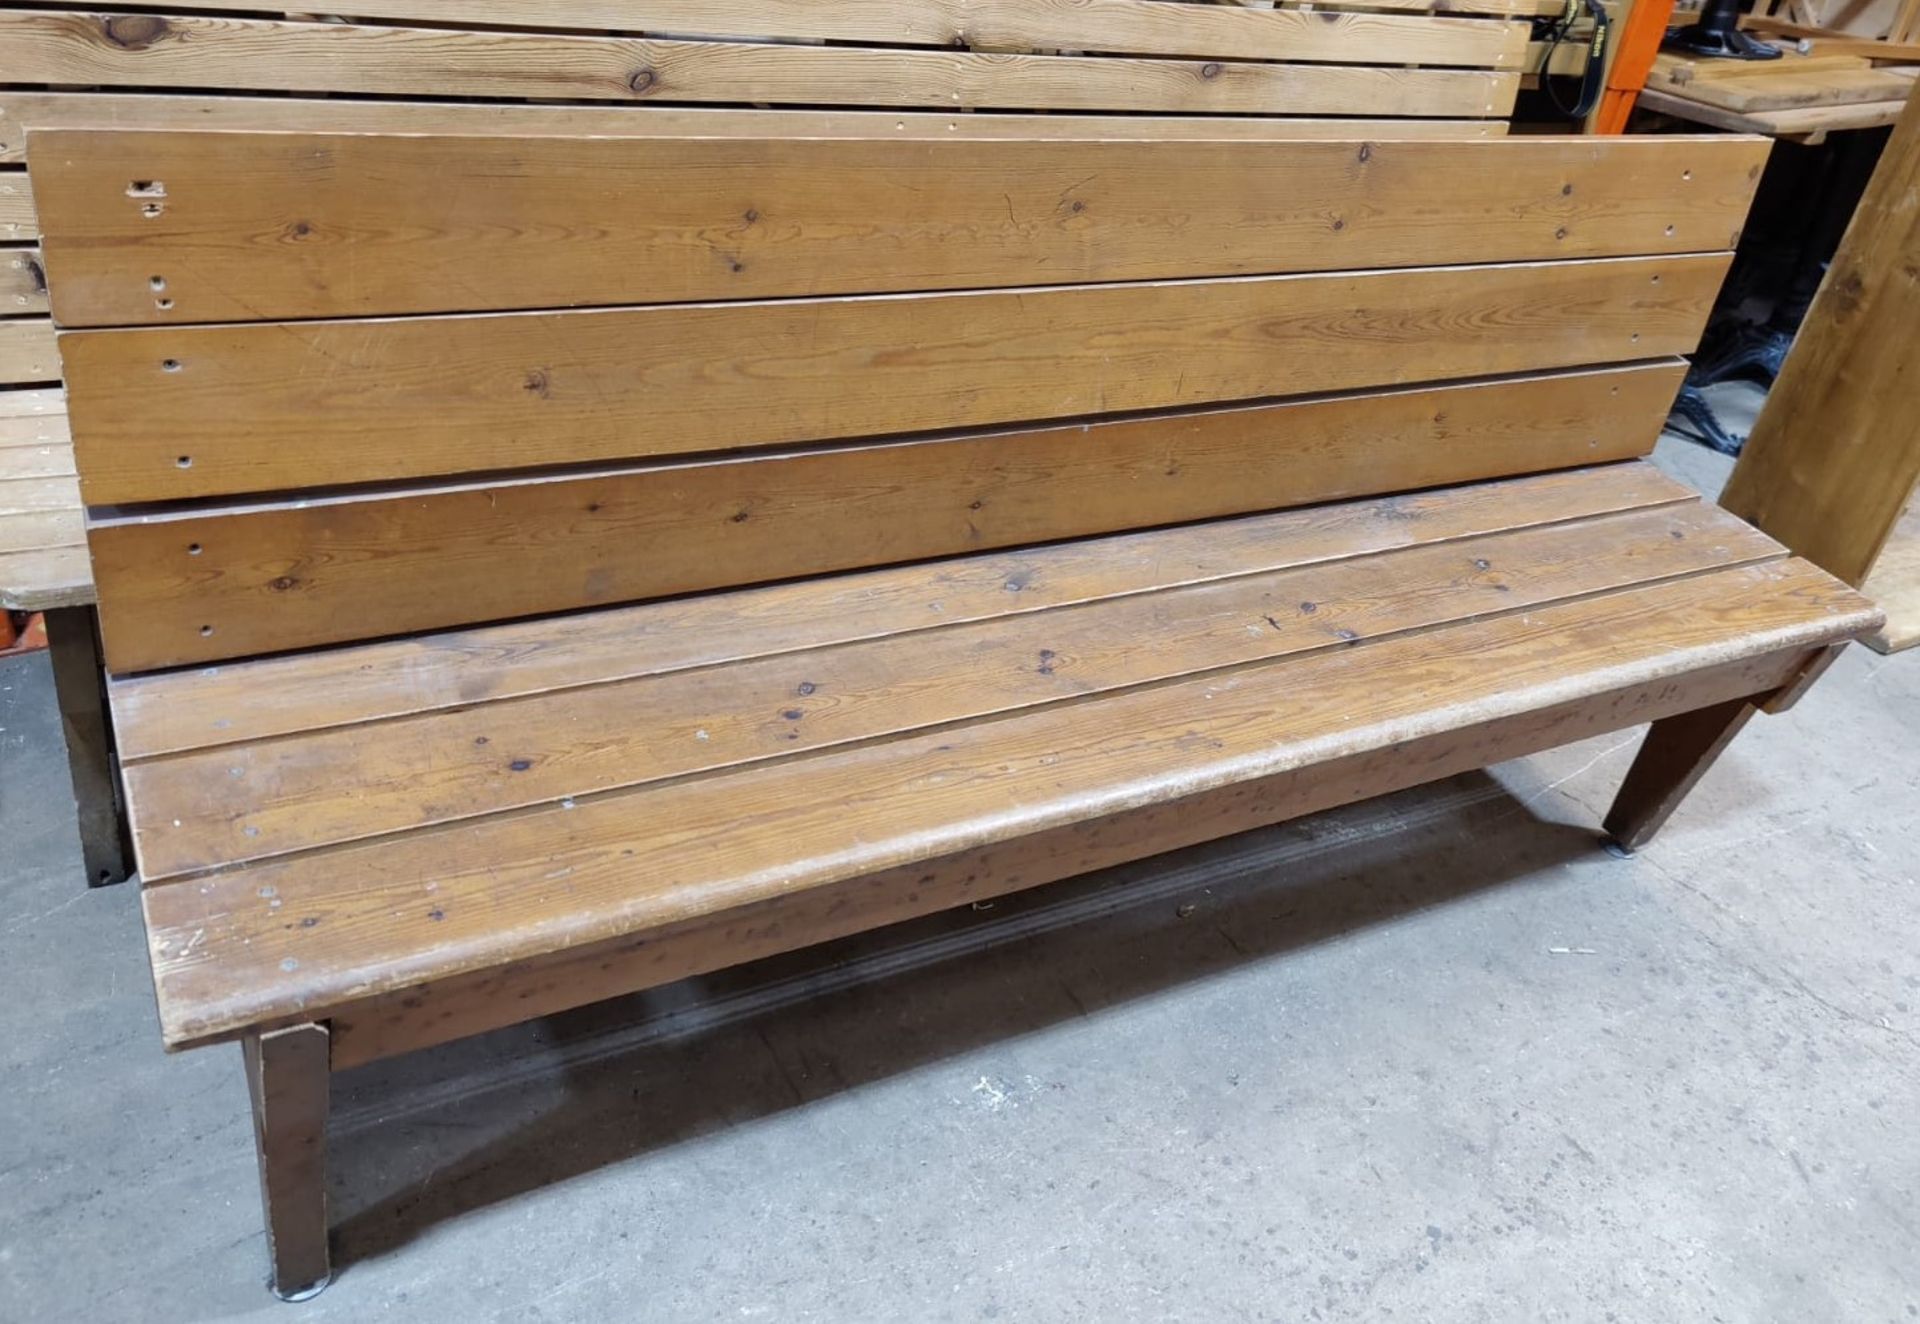 1 x Rustic Restaurant Seating Bench - Recently Removed From a Restaurant Environment - Image 3 of 6